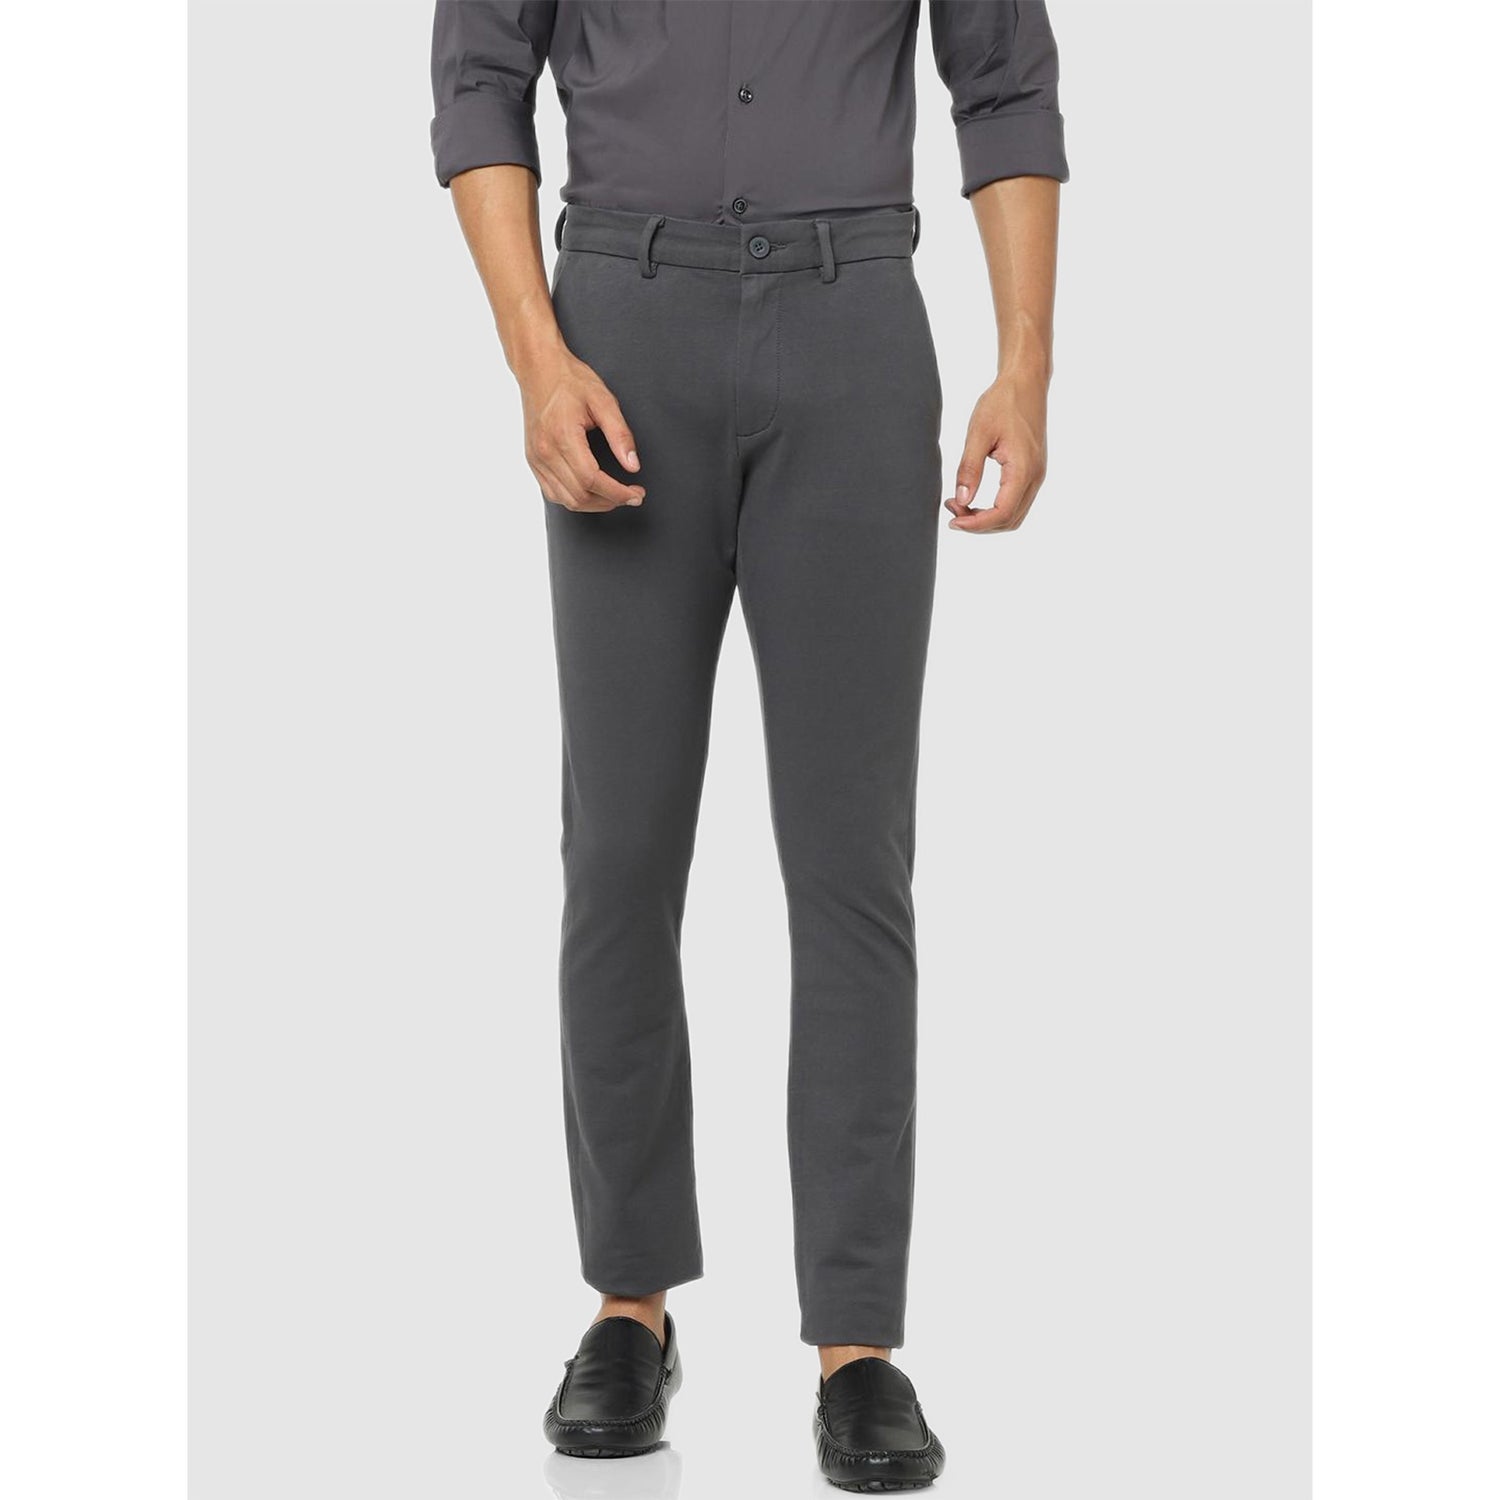 Grey Classic Regular Fit Solid Trousers (COKNIT)